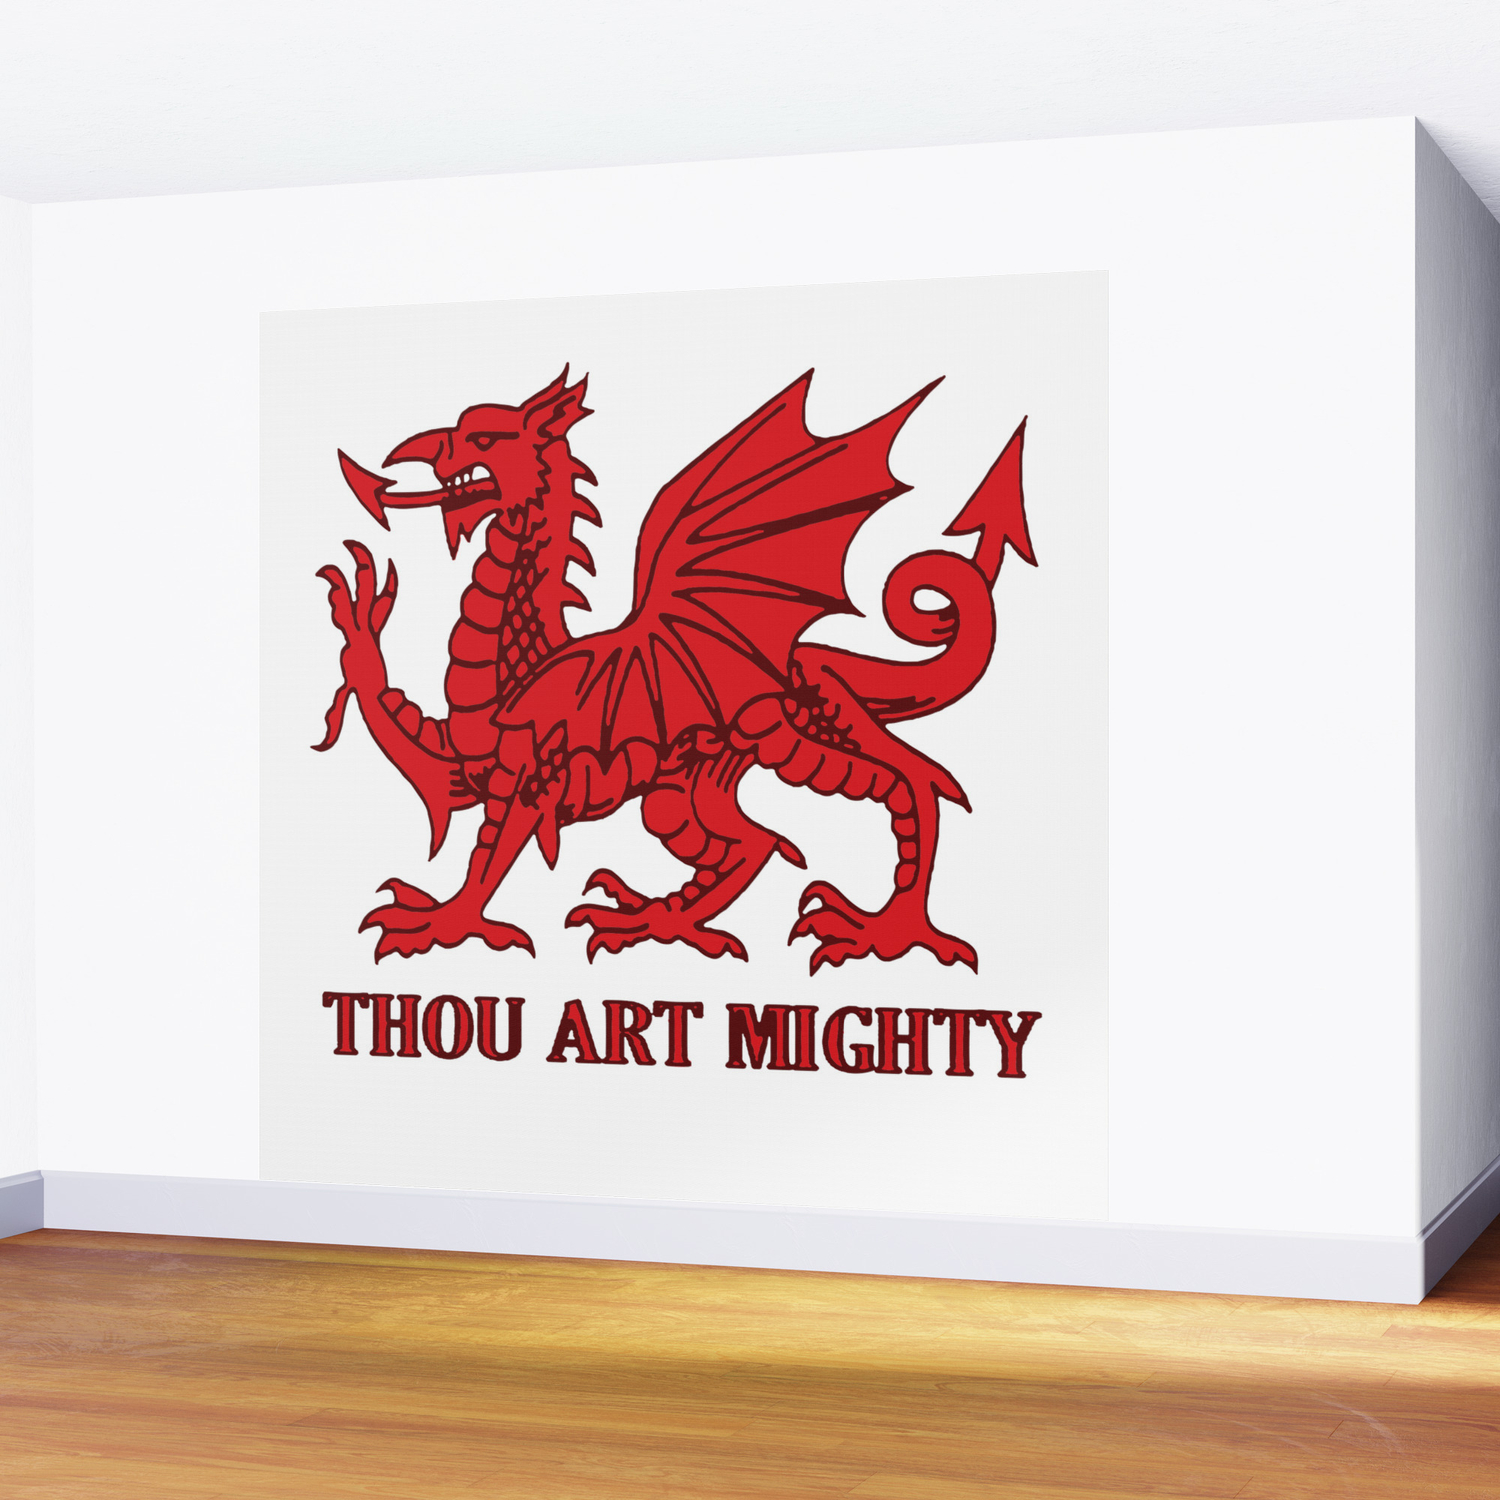 Wooden Welsh Dragon Rugby Clock Brown Two Colours